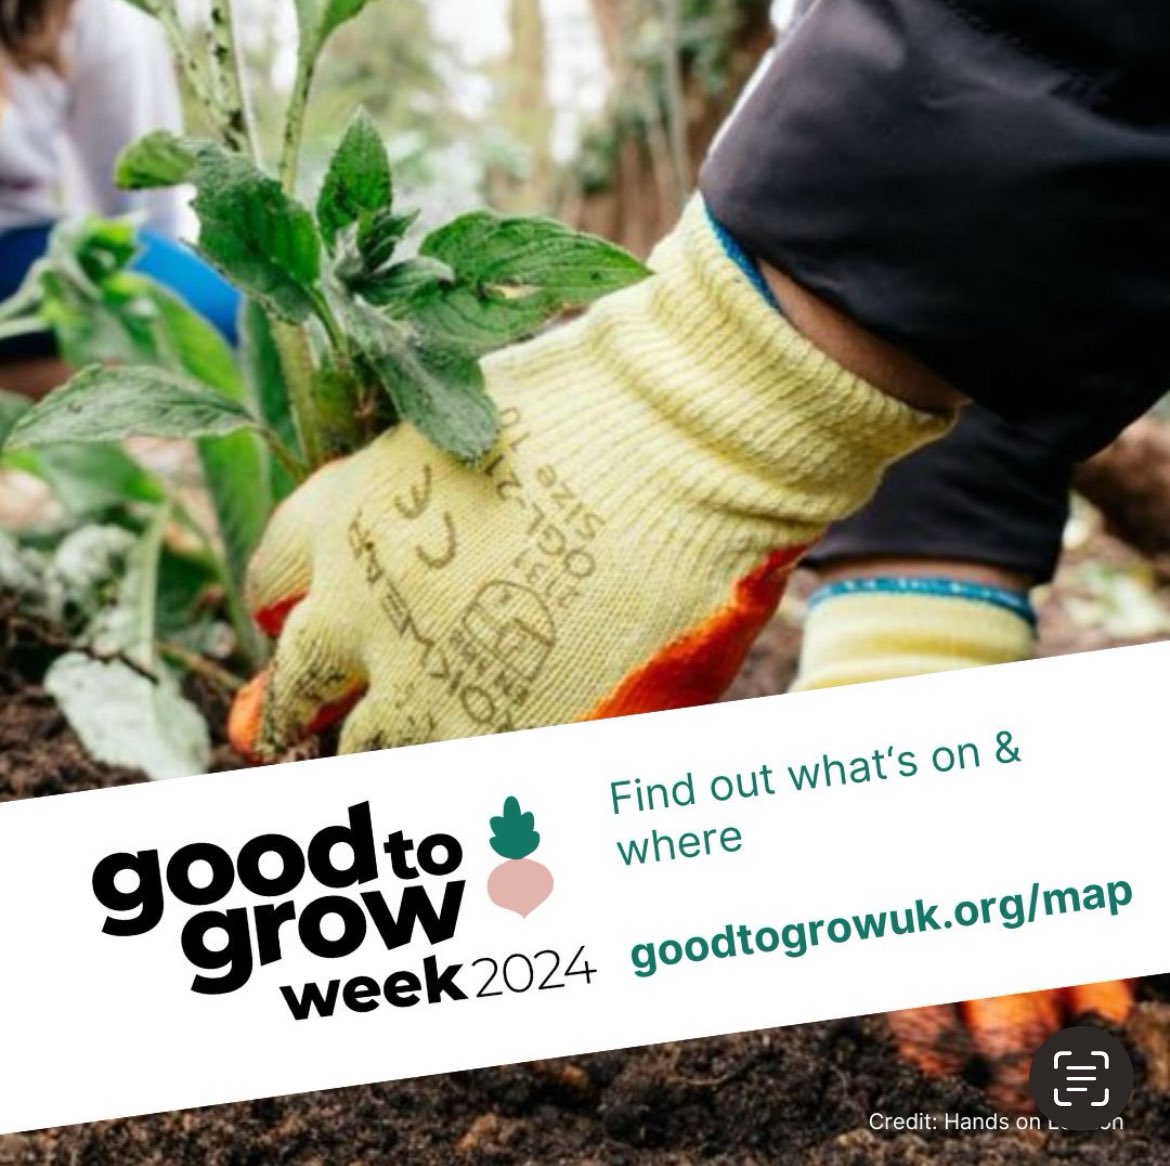 Want to connect with your community?🍓Want top tips on #growyourown? 🌿Community gardens across the UK open their gates 22 April for a week of celebration. Check out the map to find your nearest goodtogrowuk.org/map/  @UKGoodtoGrow @Capital_Growth @UKSustain #GoodToGrow2024